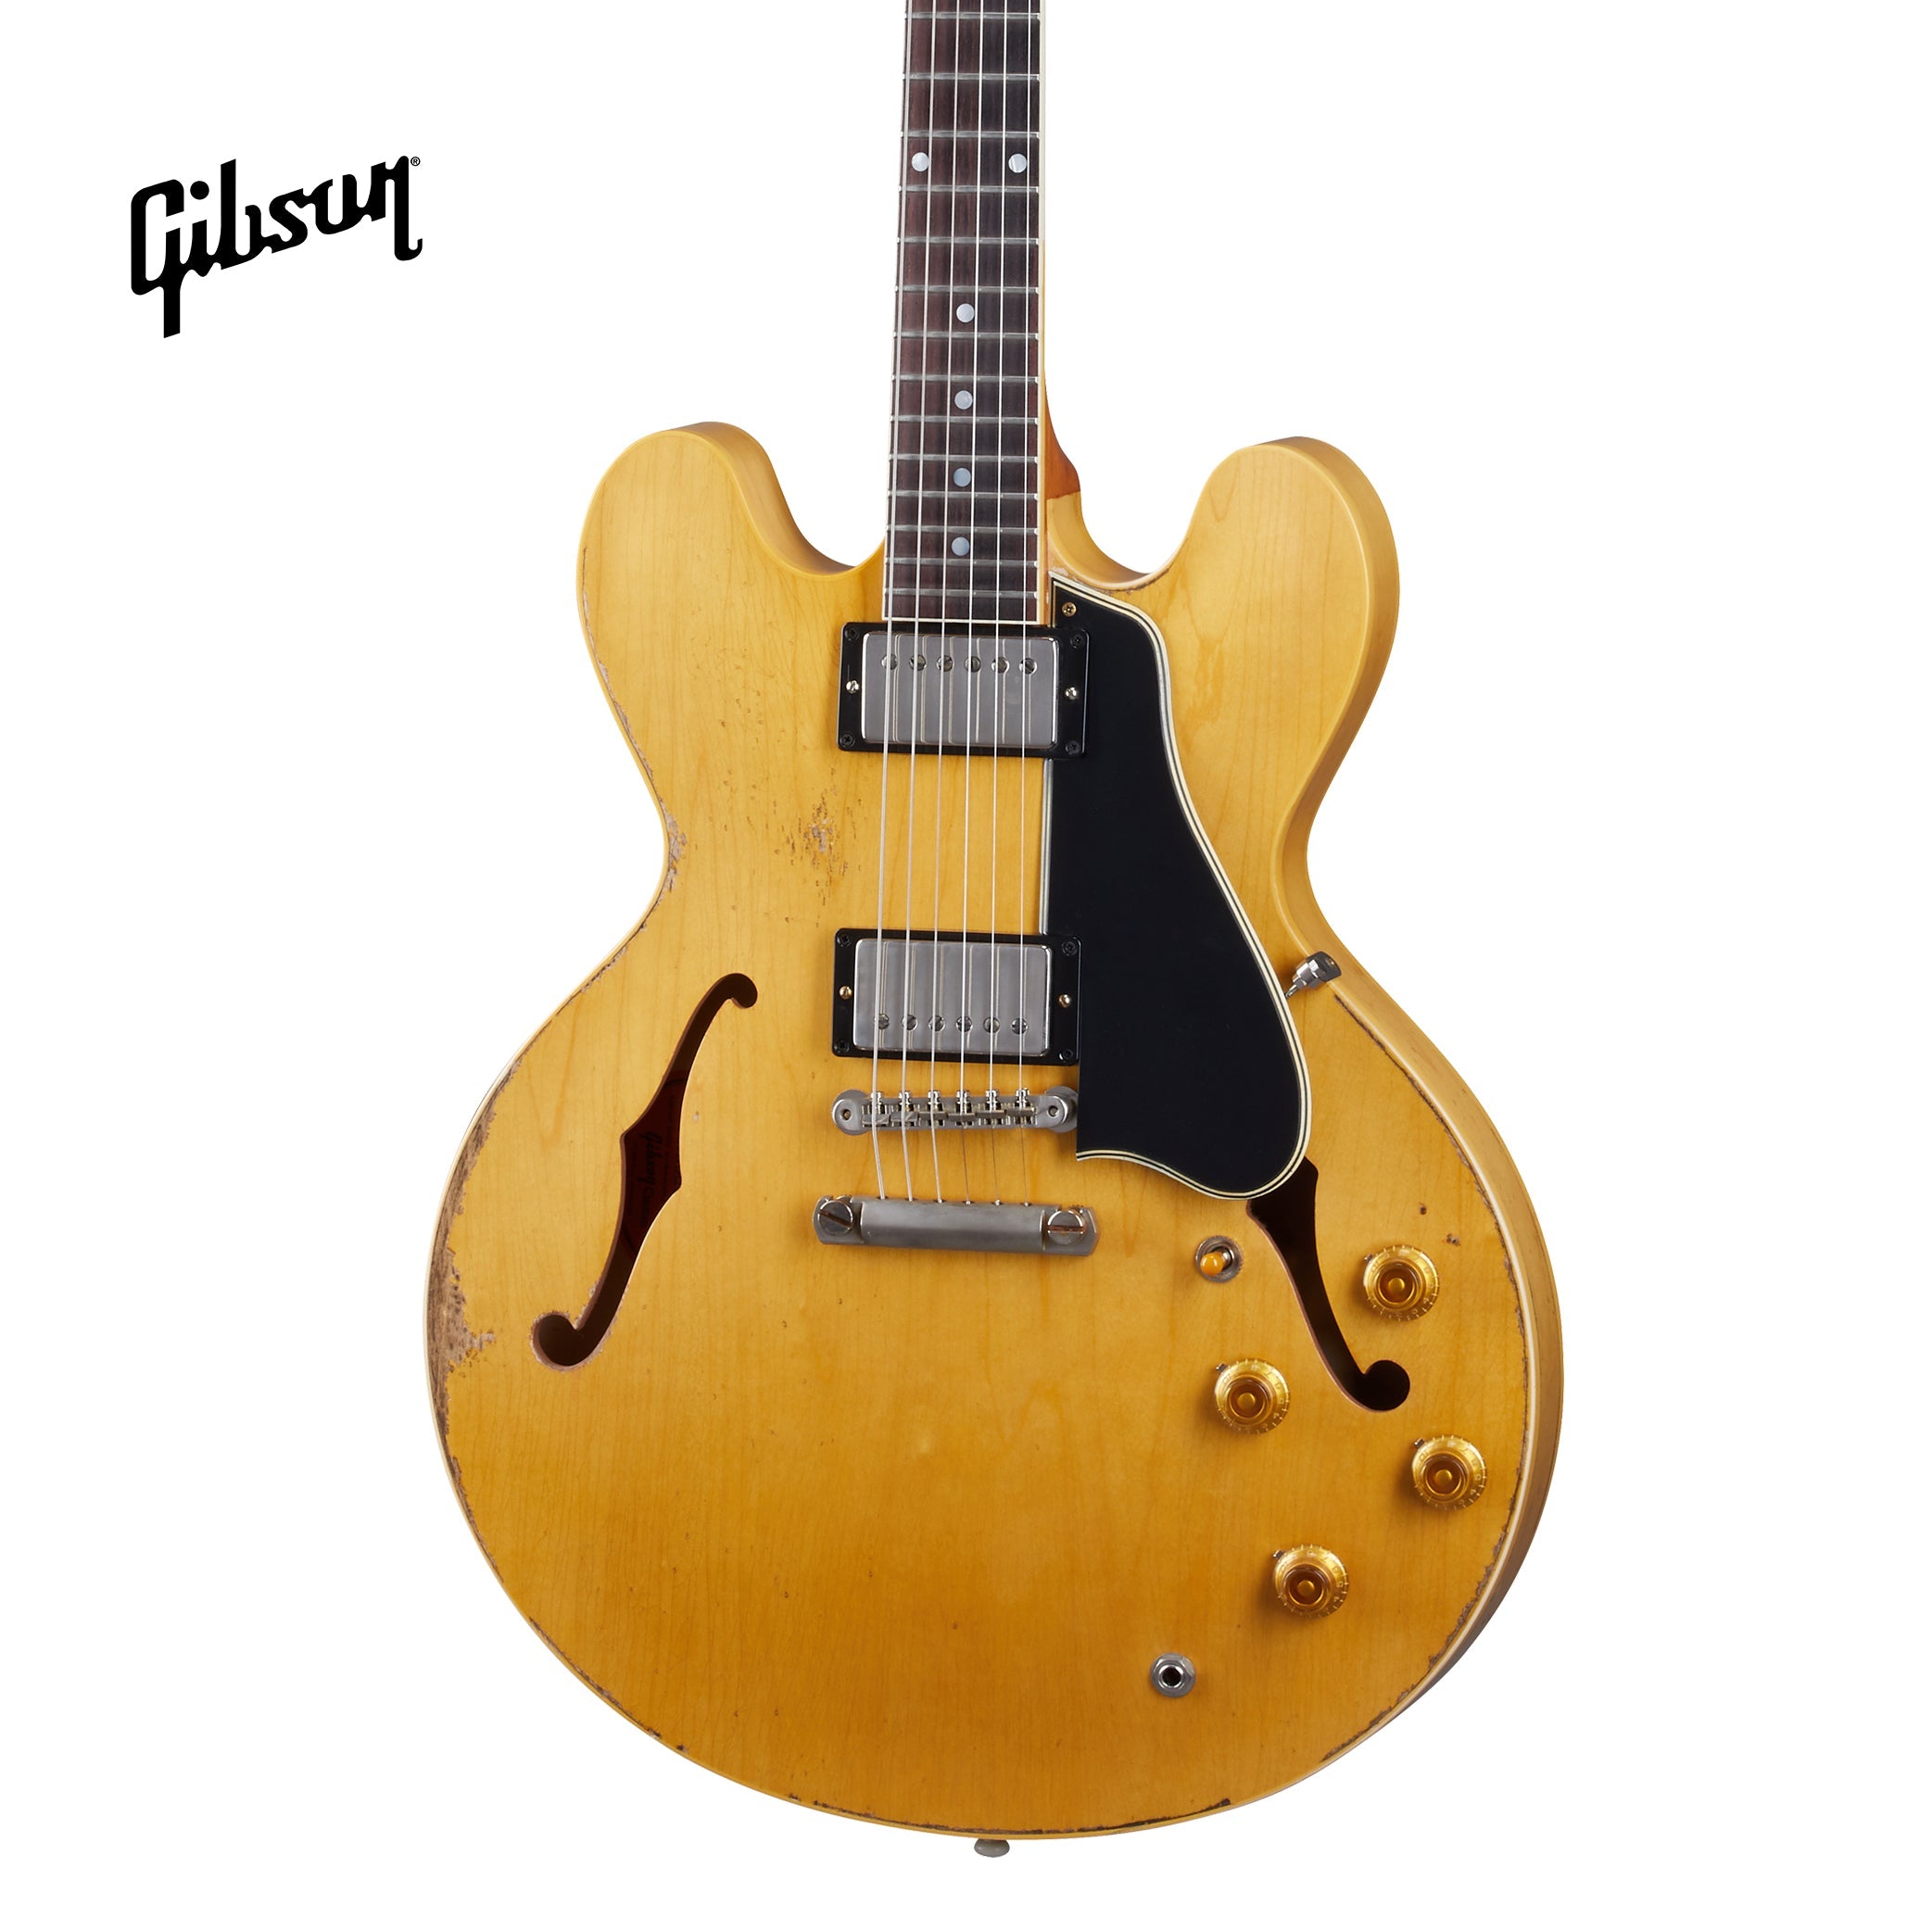 GIBSON 1959 ES-335 REISSUE ULTRA HEAVY AGED SEMI-HOLLOWBODY ELECTRIC GUITAR - VINTAGE NATURAL